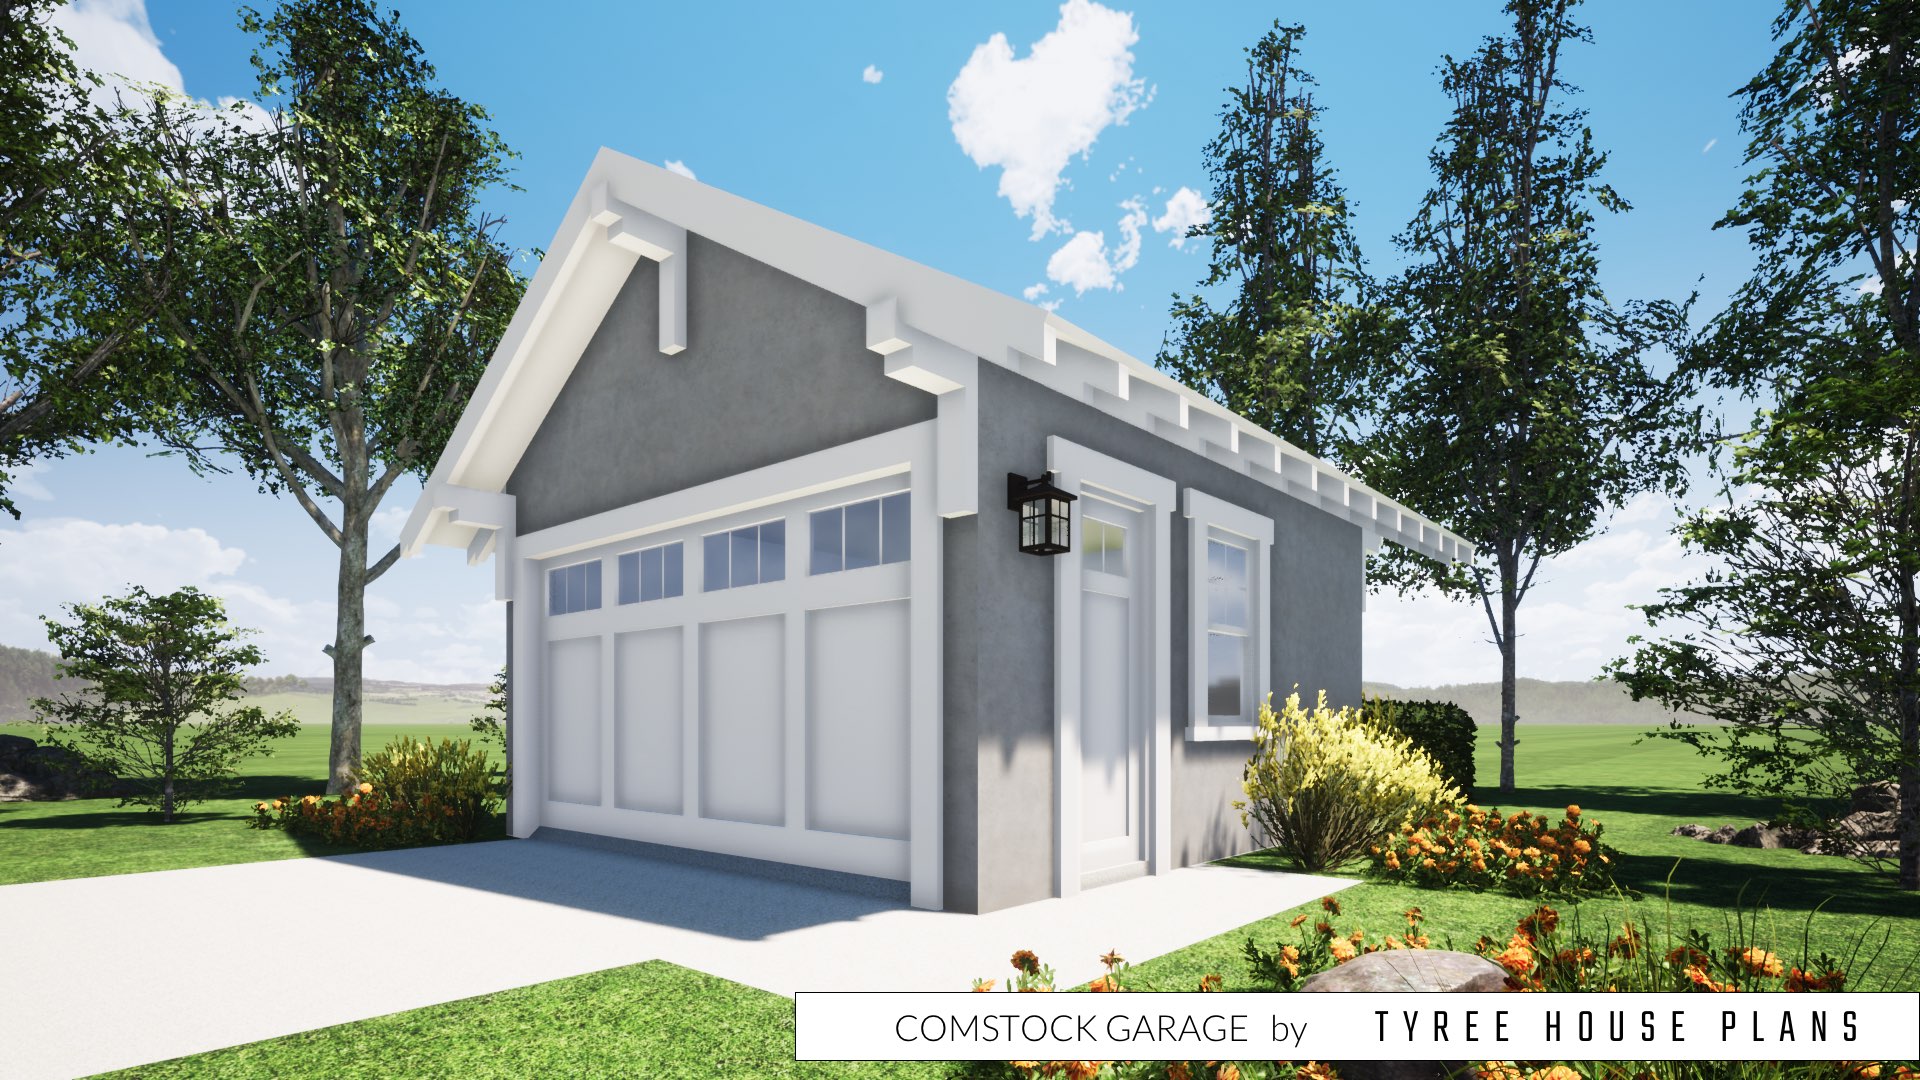 Detached garage. Comstock by Tyree House Plans.